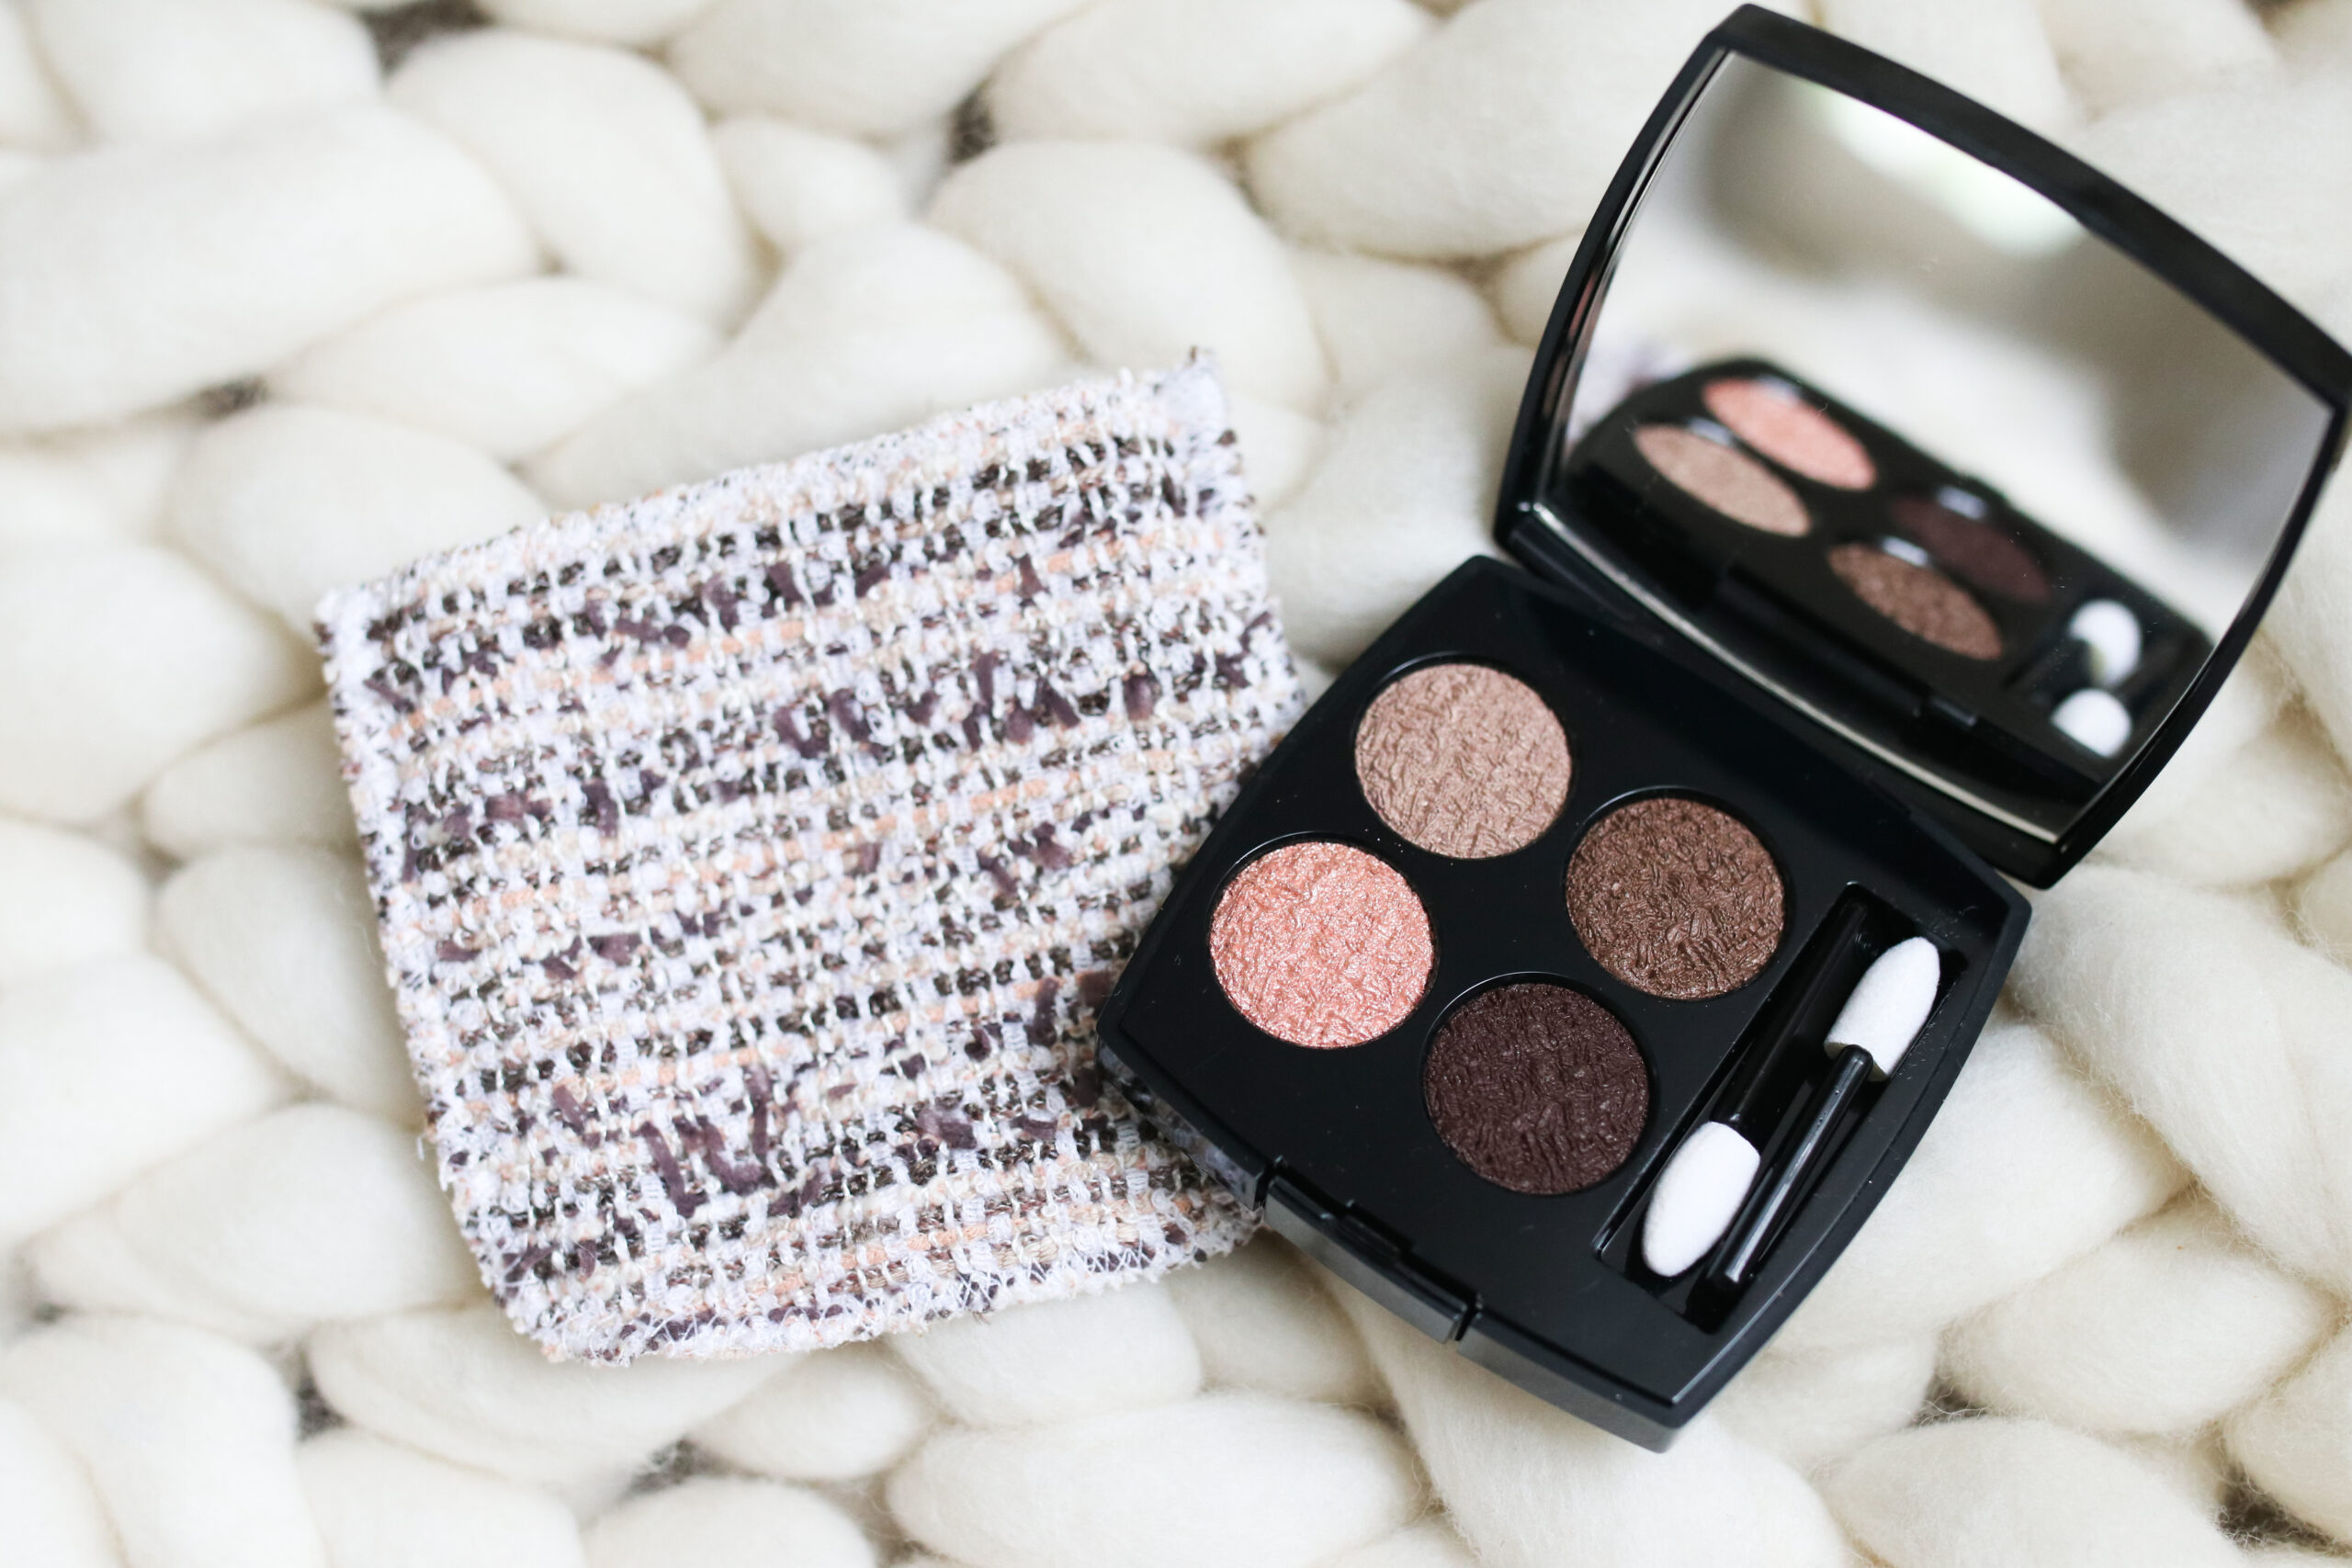 Chanel Entrelacs Eyeshadow Palette Review  Swatches  the beauty endeavor